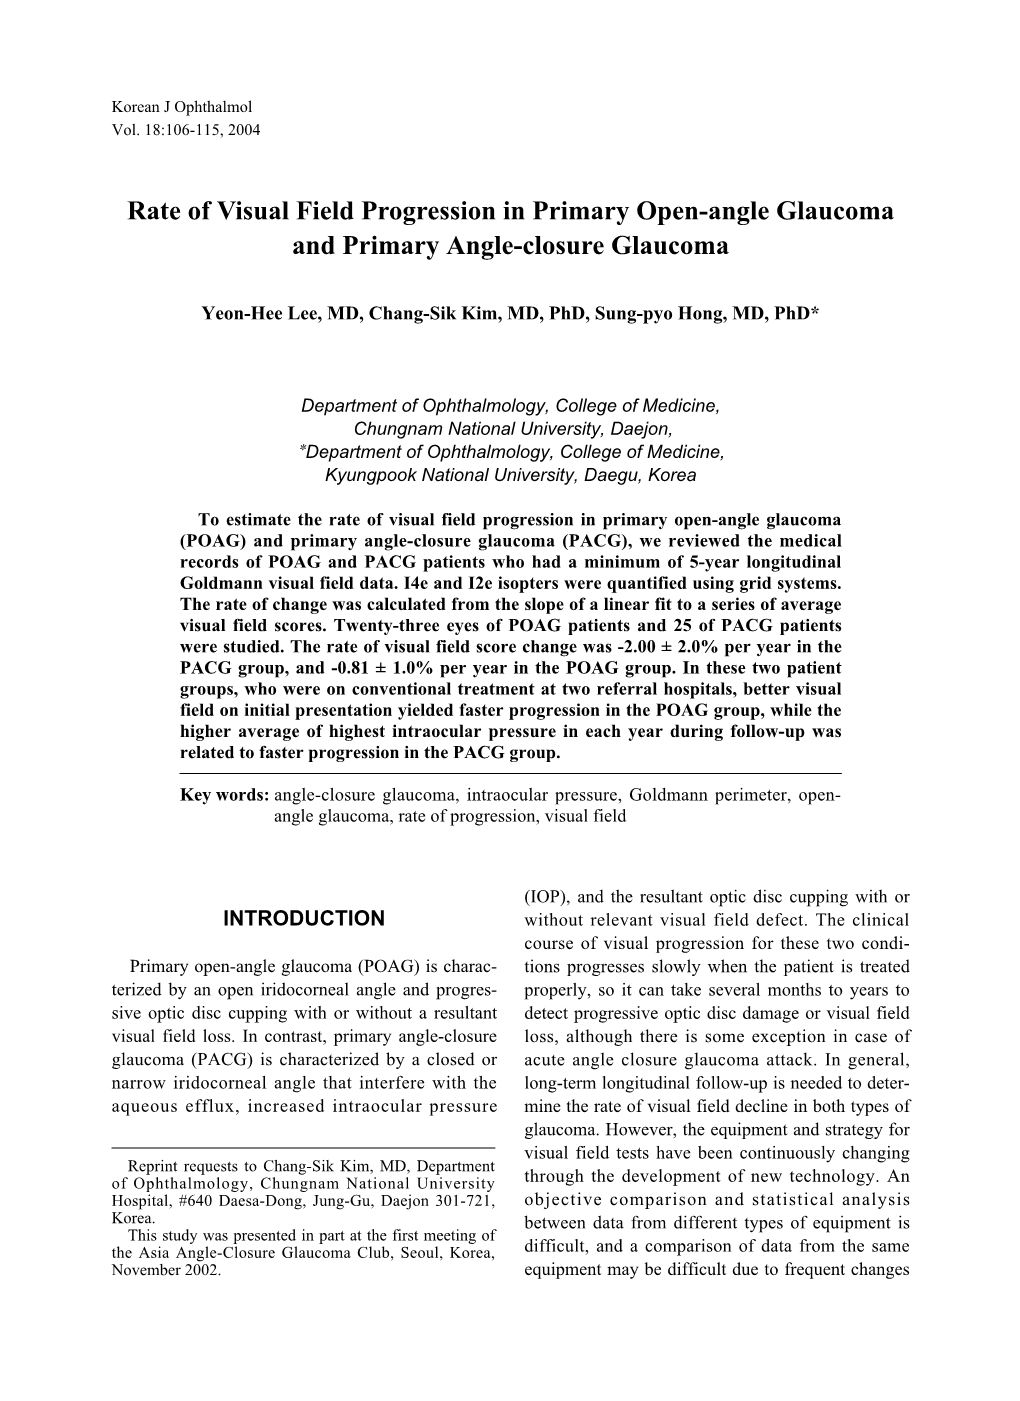 Rate of Visual Field Progression in Primary Open-Angle Glaucoma and Primary Angle-Closure Glaucoma